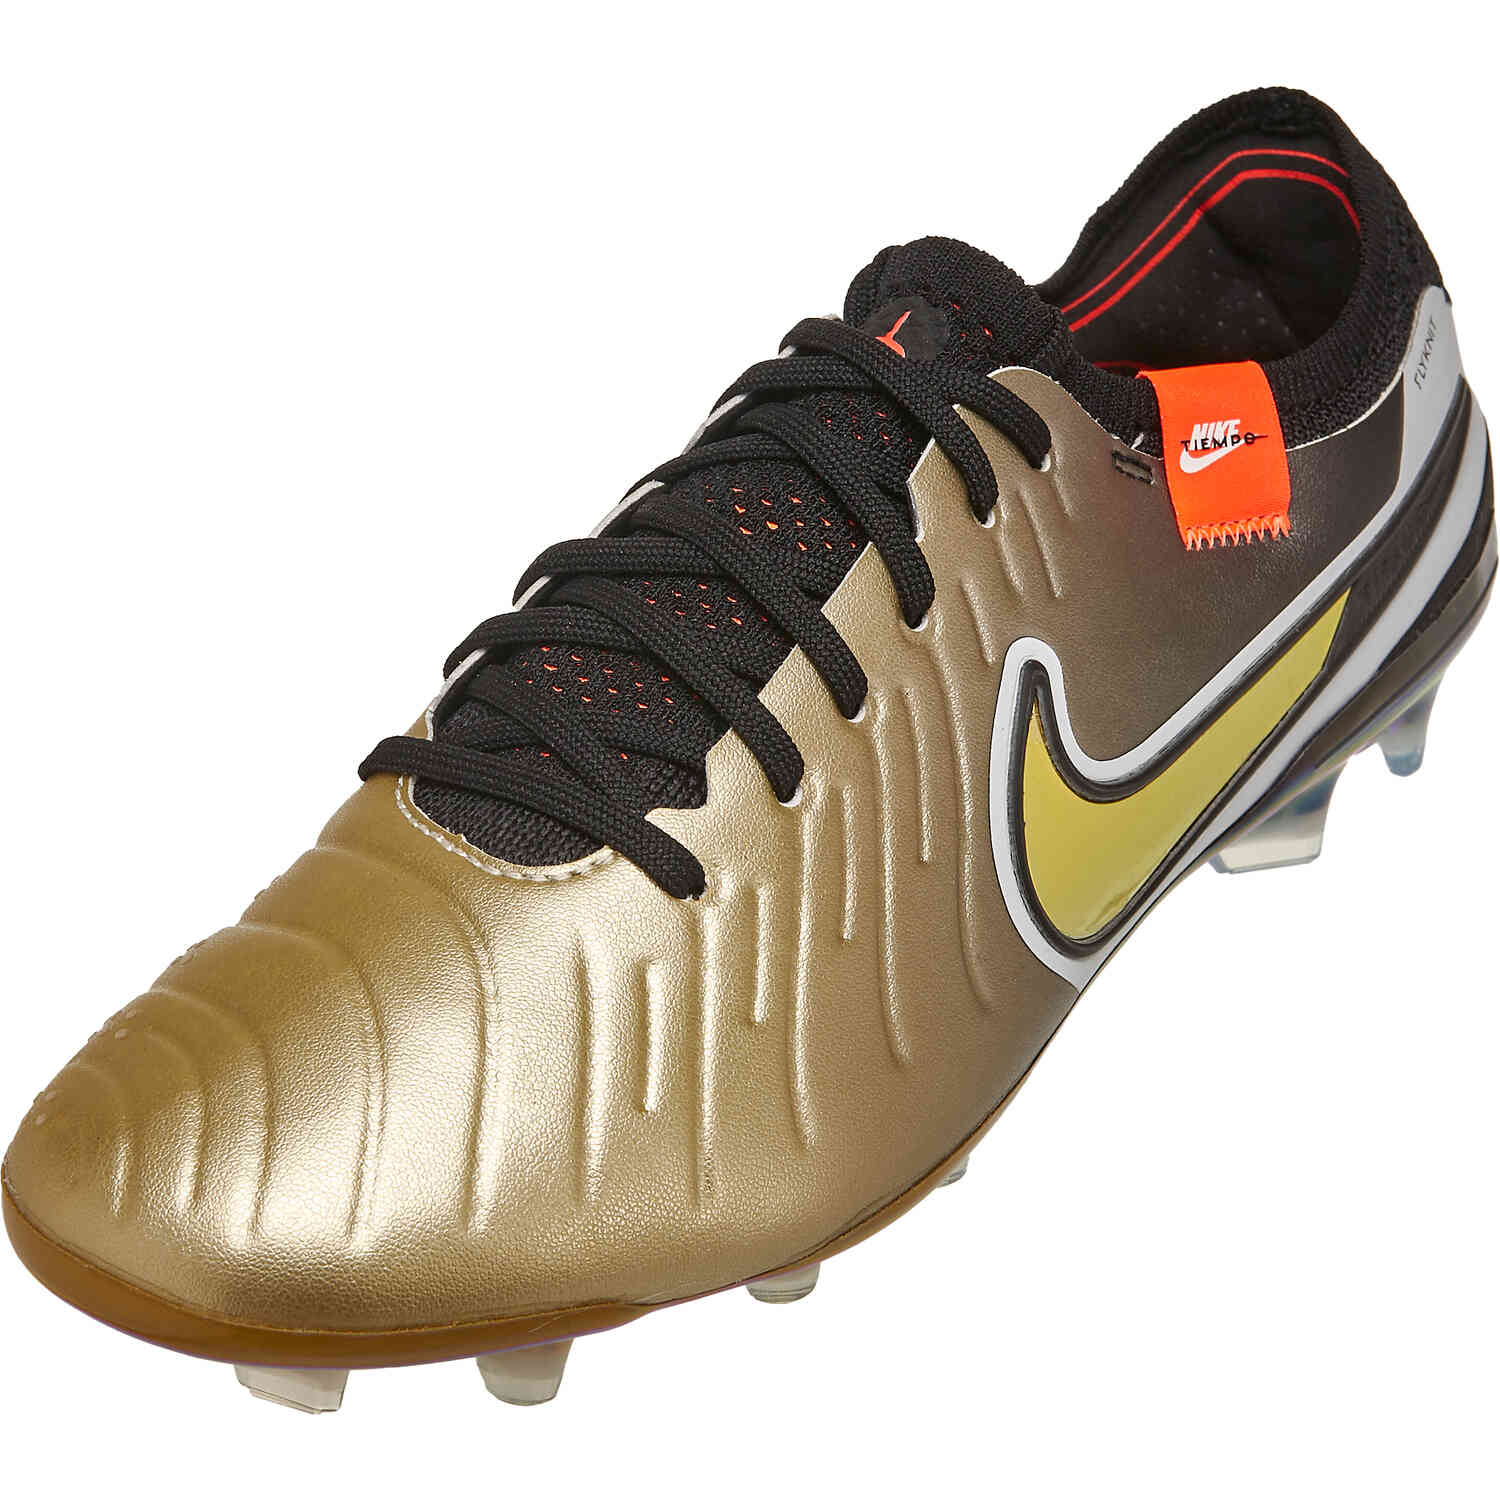 Nike Special Edition Tiempo Legend 10 Elite Firm Soccer Cleats - Metallic Gold Silk, Metallic Gold Coin & Black - Master